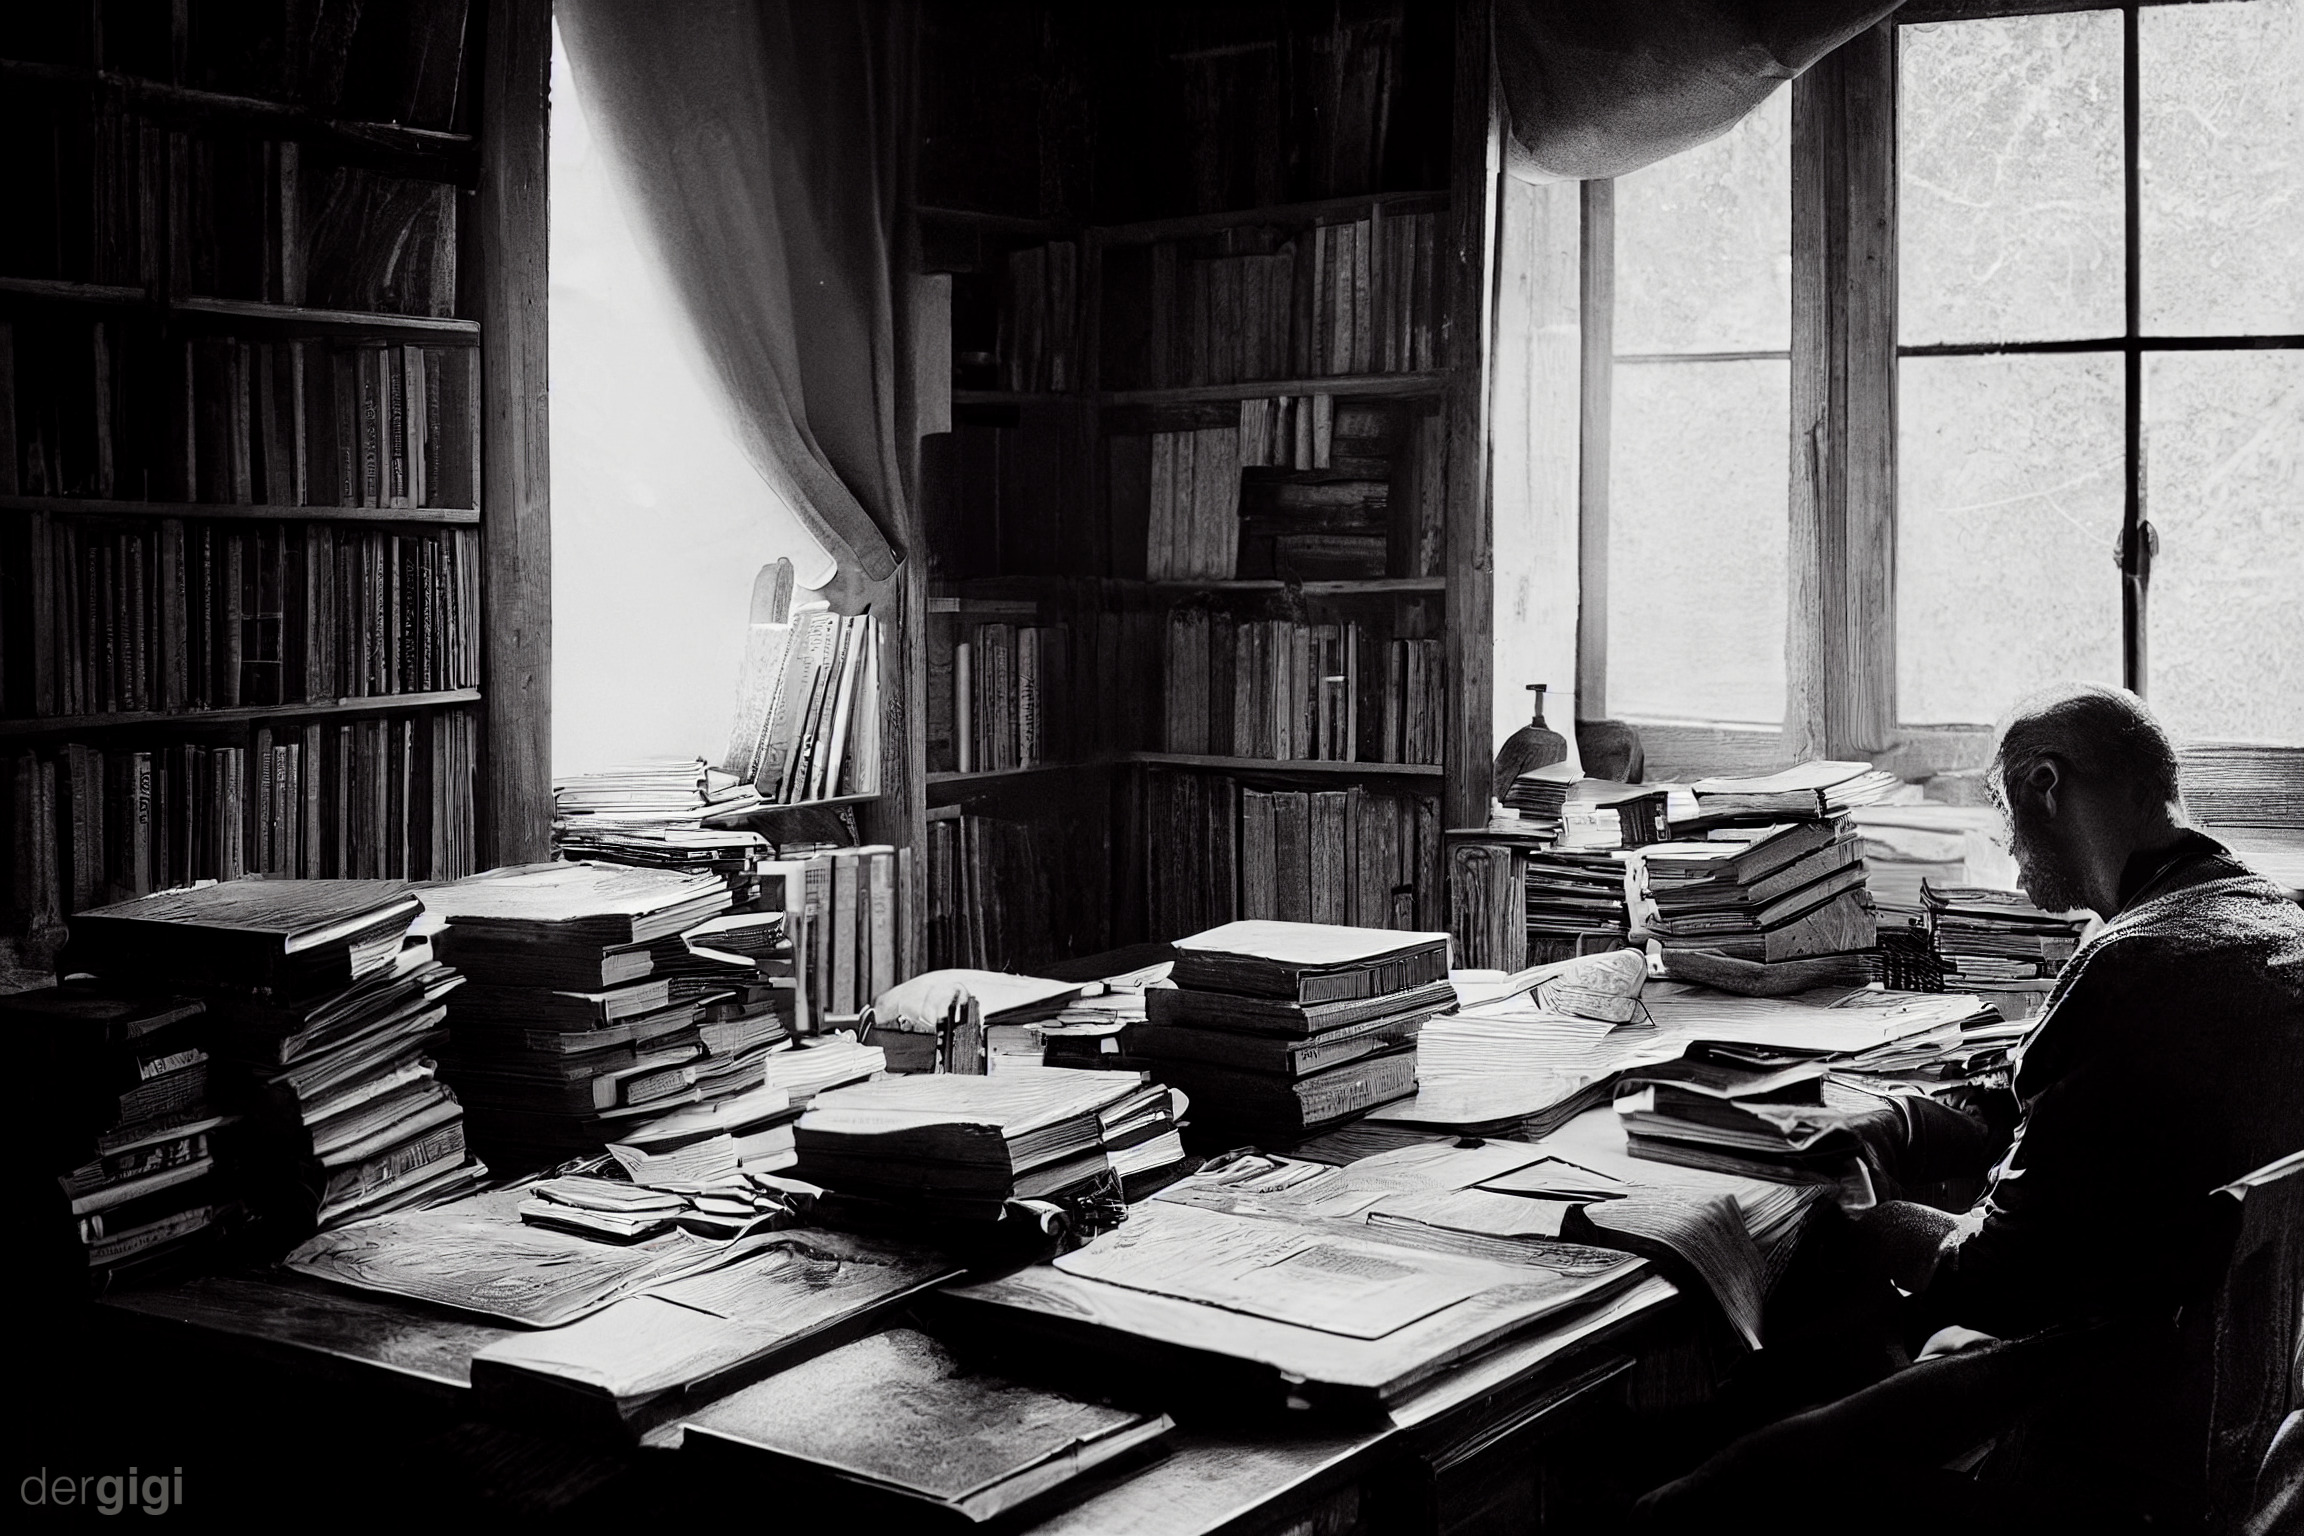 'An author sitting at his old wooden desk in his small cabin.'